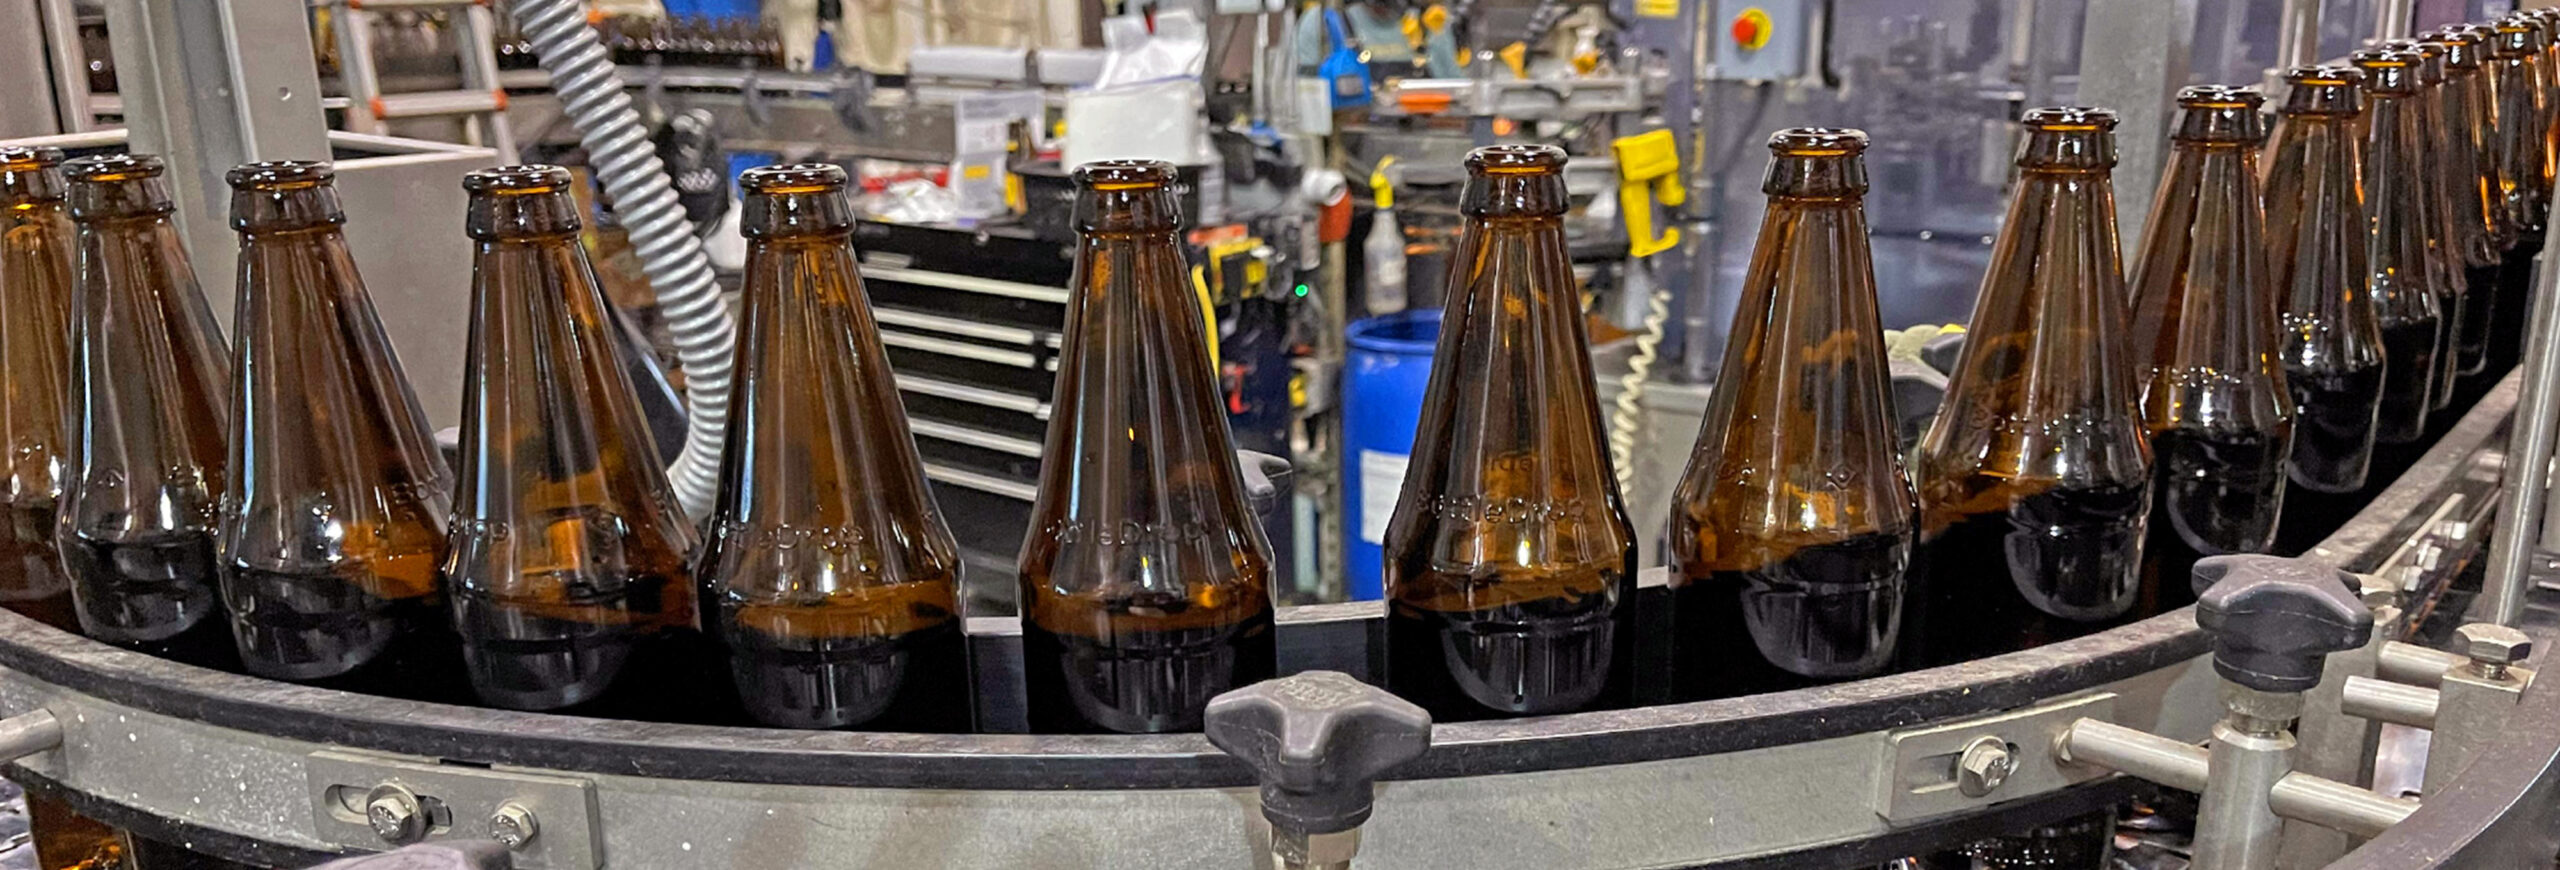 Brown refillable glass bottles in a cleaning line.